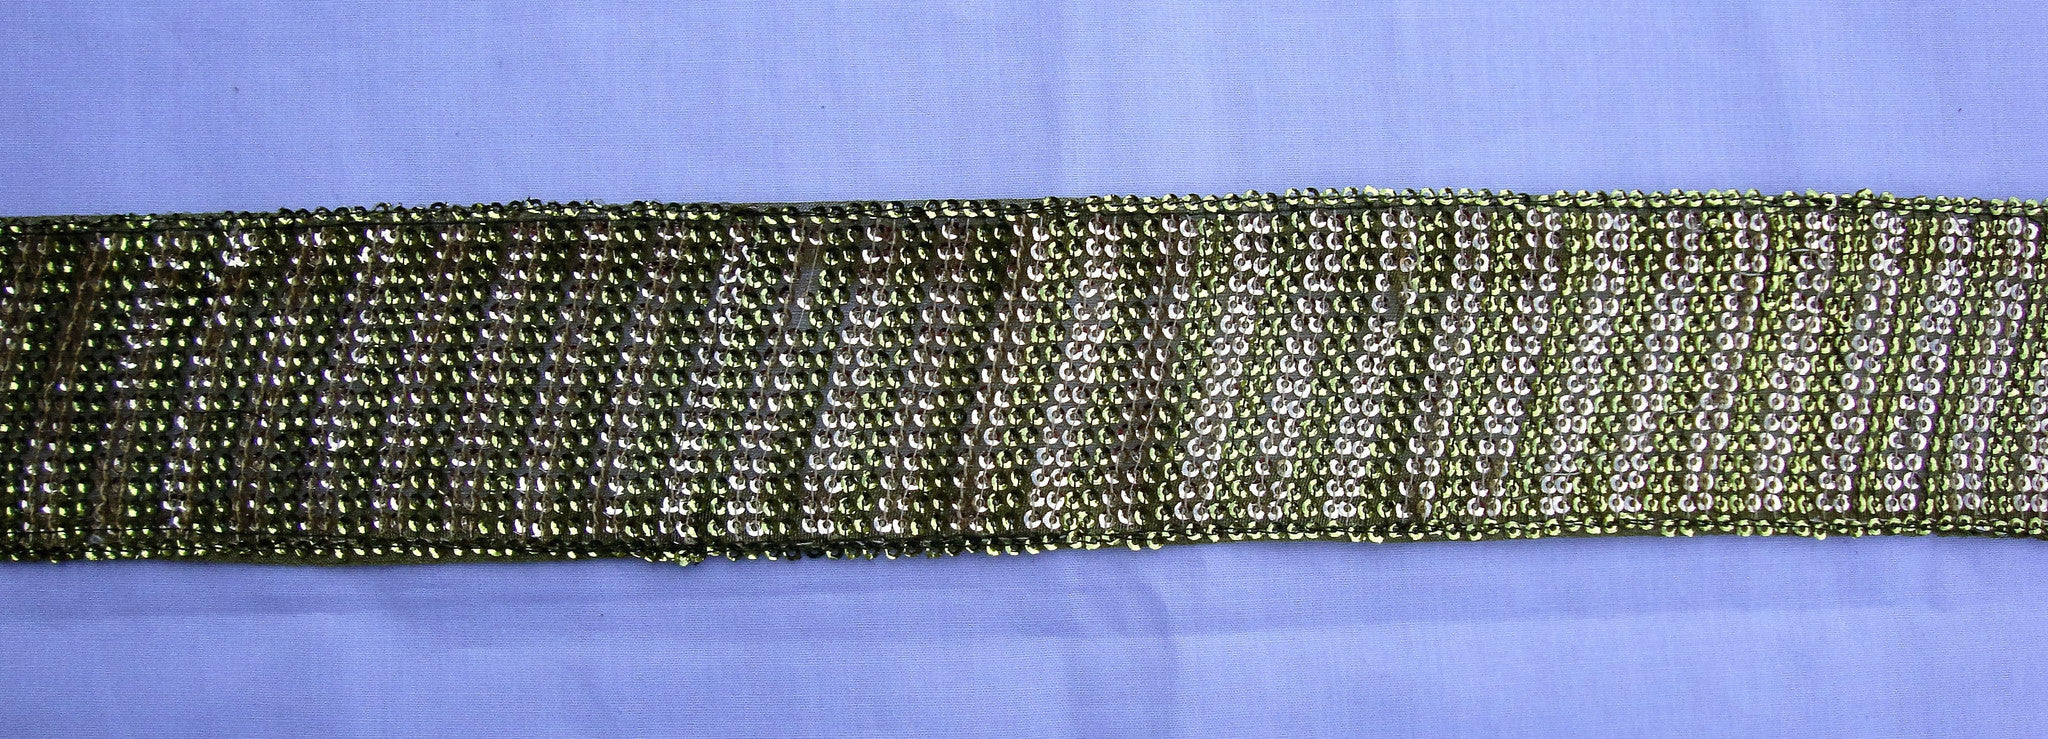 Lime Green Trimming with Sequins (Sold as a 3 yard piece)